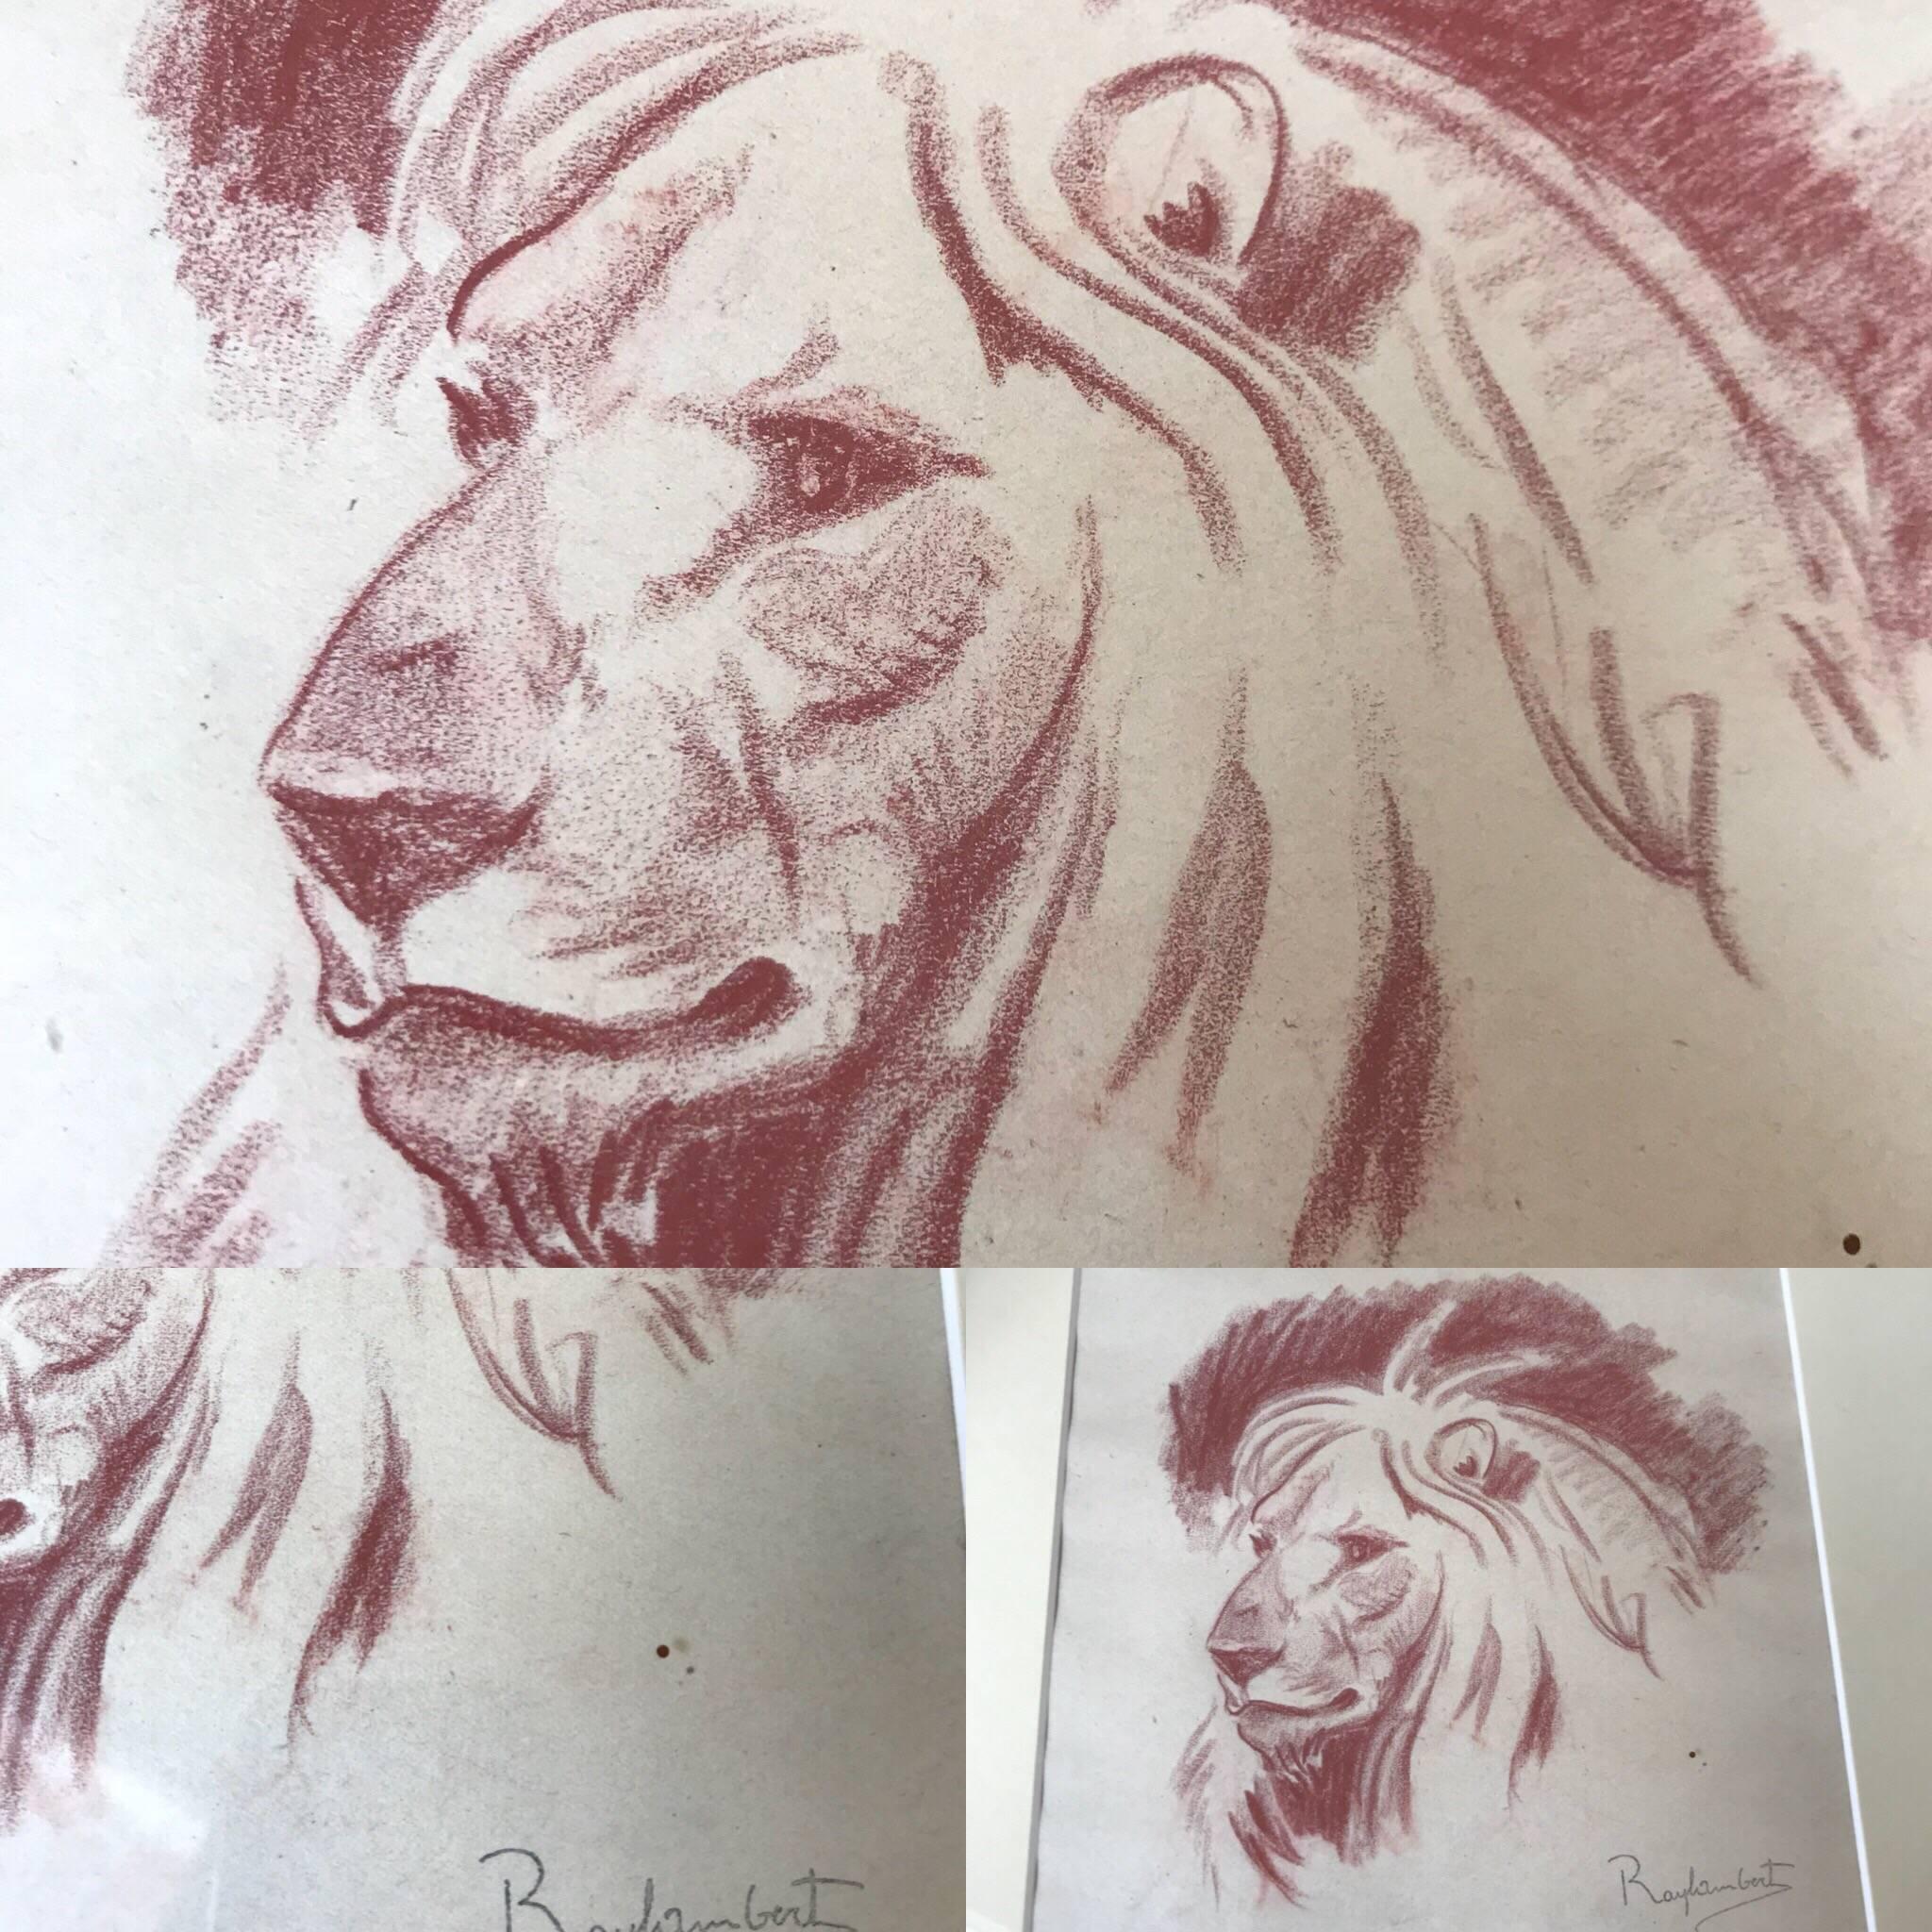 Paper Paul Jouve Period  4  Original French Drawing Most of Lion by Raylambert, 1940